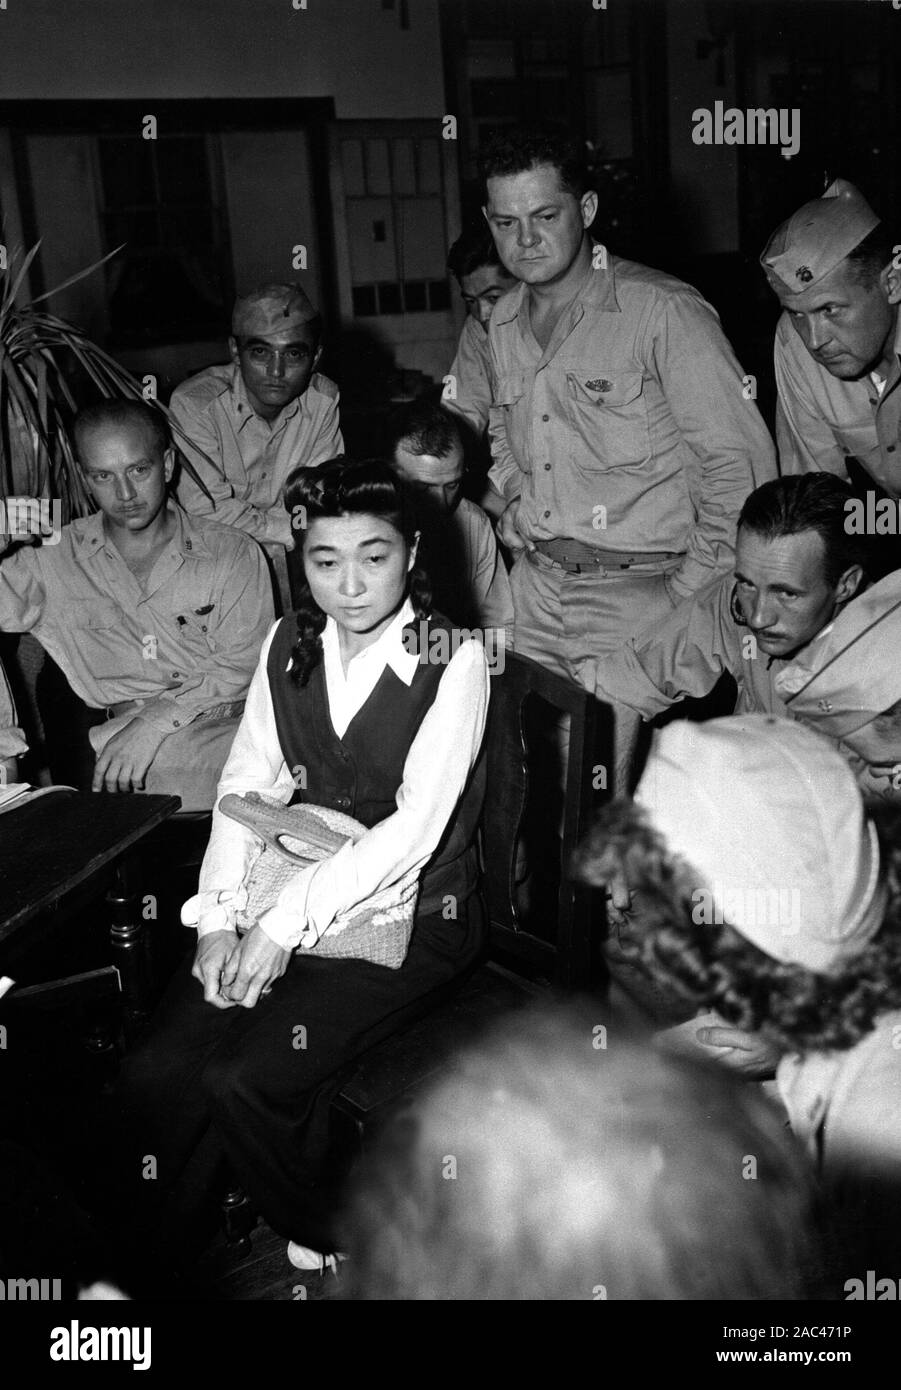 IVA TOGURI d'AQUINO (1916-2006) American-born Japanese broadcaster who shared the title  Tokyo Roase with several other women who broadcast Japanese propaganda during WW2. Seen here in September 1945 being questioned by American media correspondents. Photo: US Navy Stock Photo